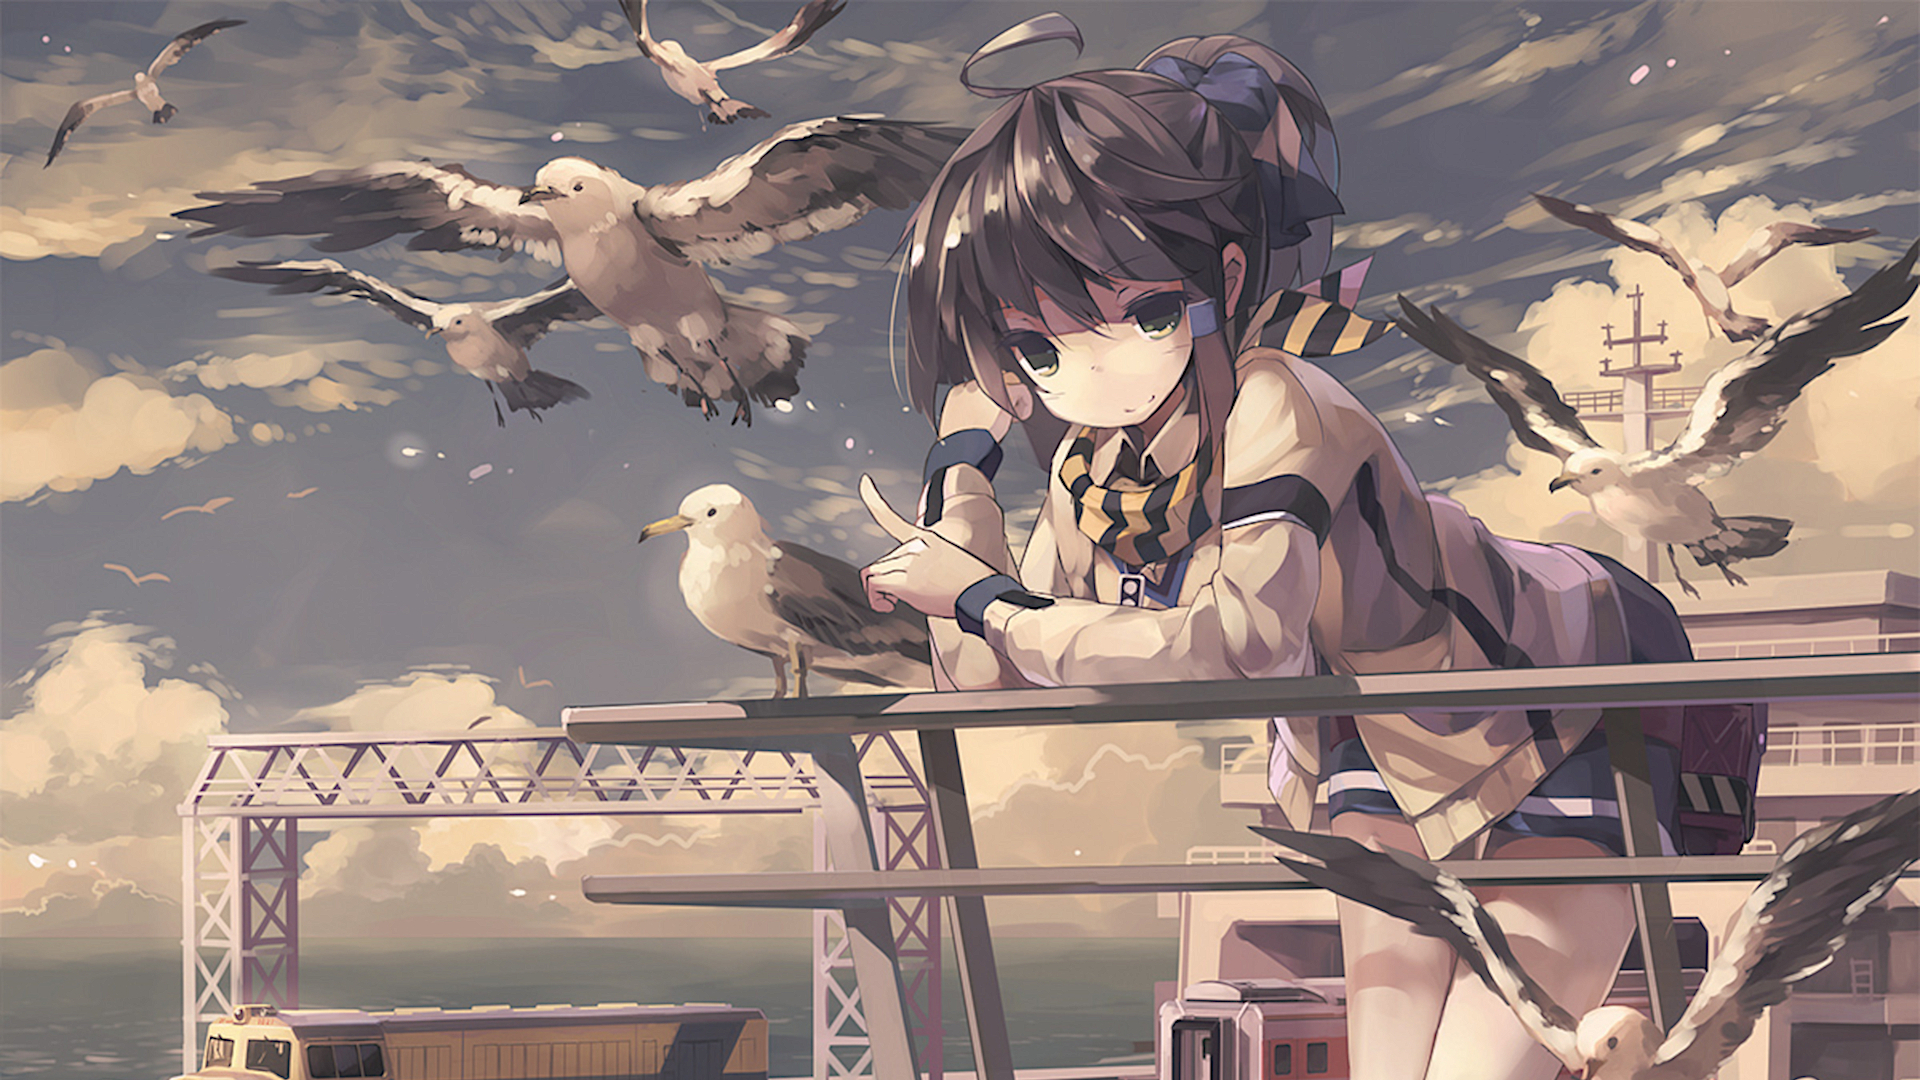 Anime 1920x1080 scarf brown eyes brunette seagulls sea clouds sky finger pointing leaning anime girls miniskirt outdoors railing cropped artwork Huanxiang Huifeng